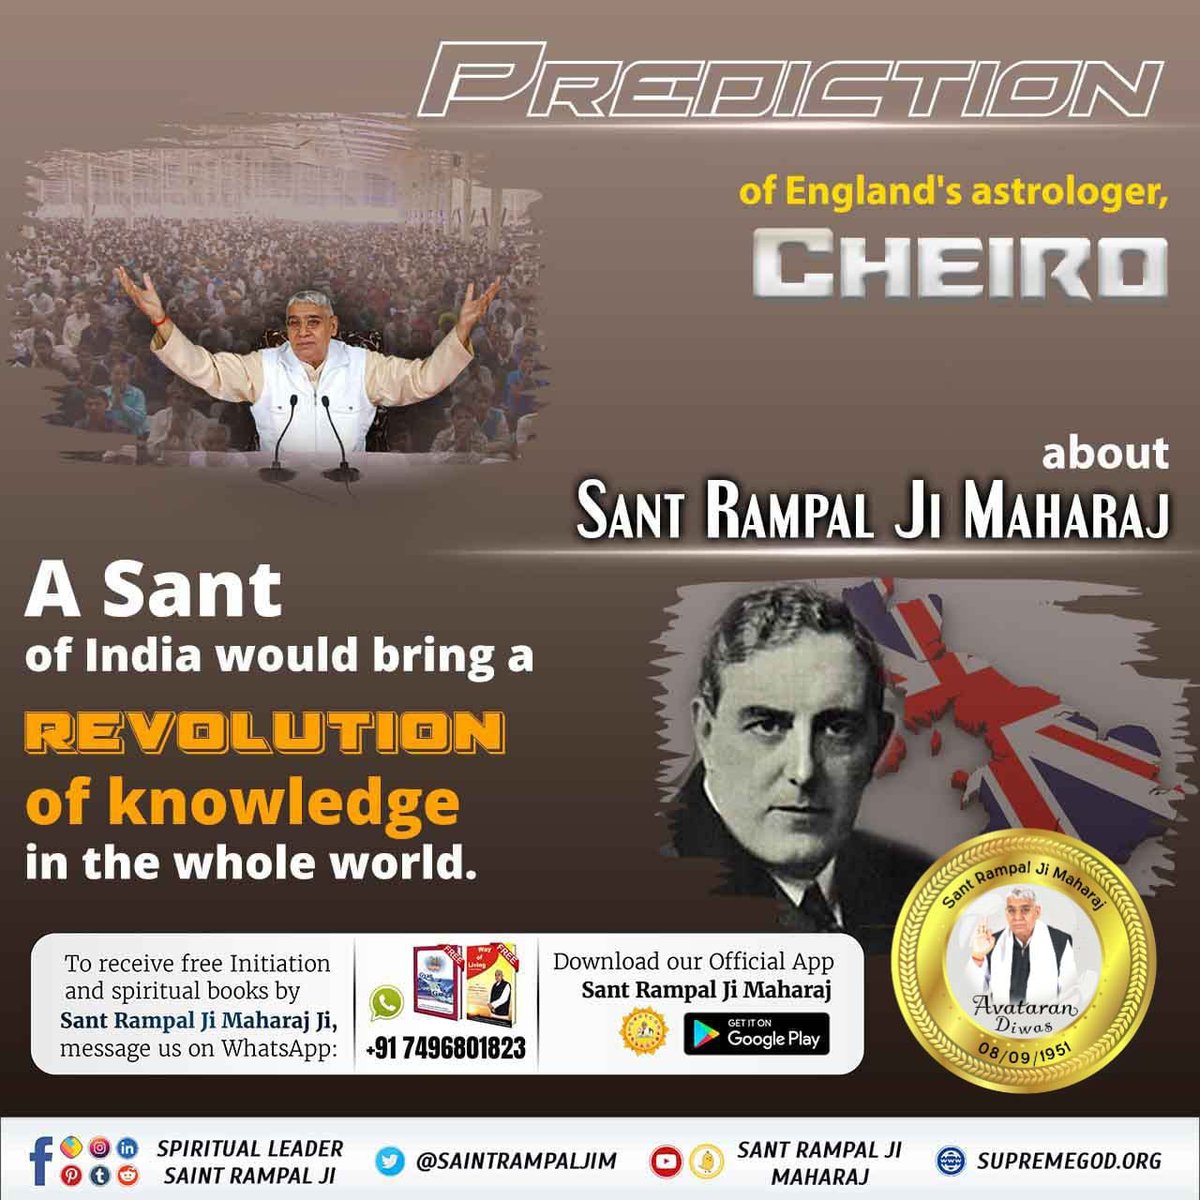 #PropheciesAboutSantRampalJi
Prediction of England's astrologer
CHEIRO
             about 
                    SANT RAMPALJI MAHARAJ
A sant of india would bring a
Revolution of knowledge in the whole world. 

ਧਰਤੀ ਤੇ ਅਵਤਾਰ